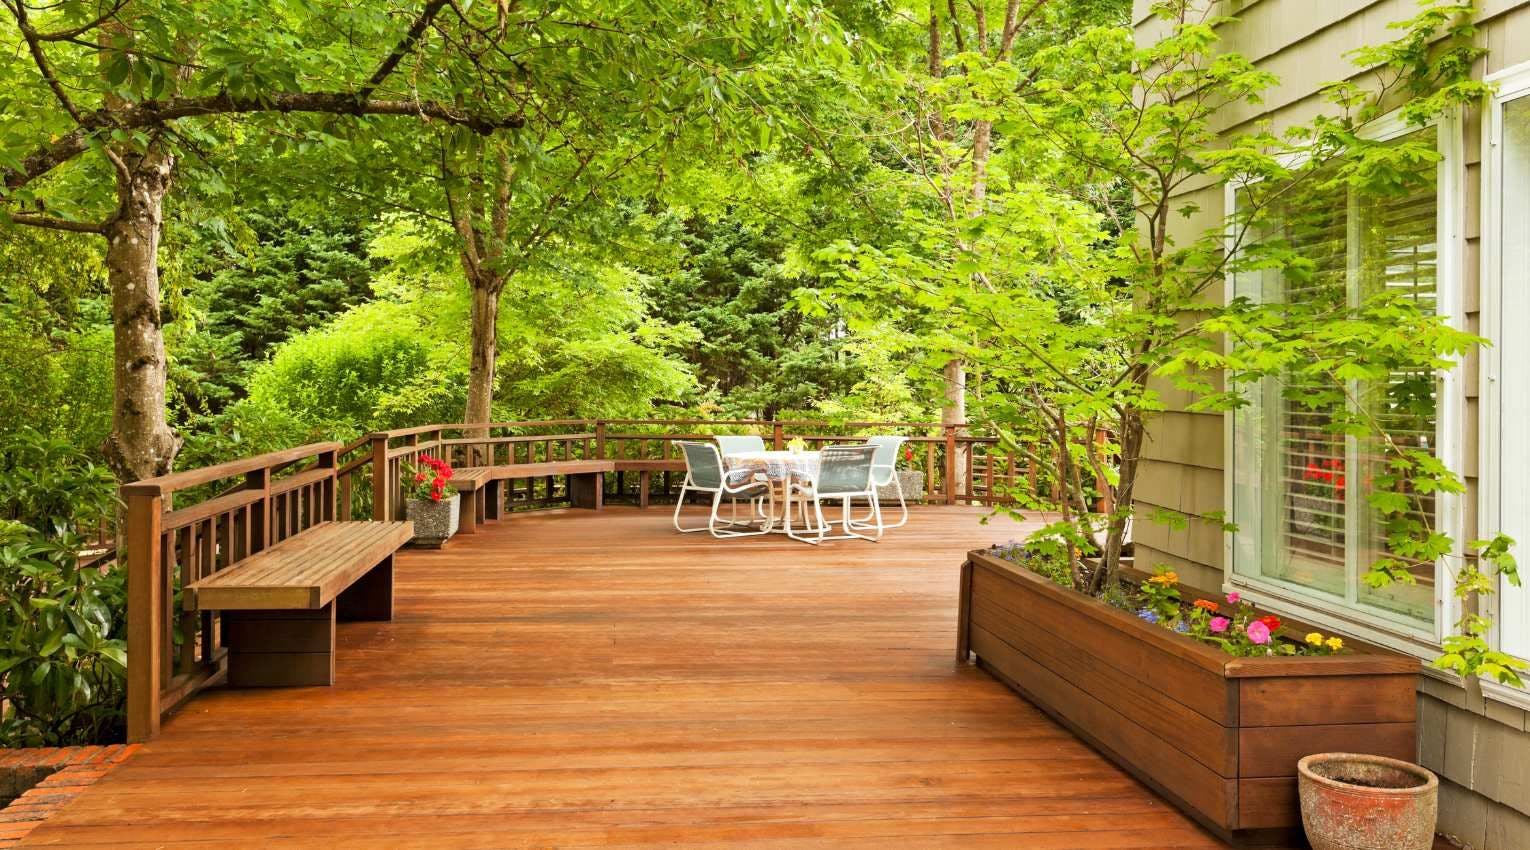 wooden deck surrounded by green shrubs and trees